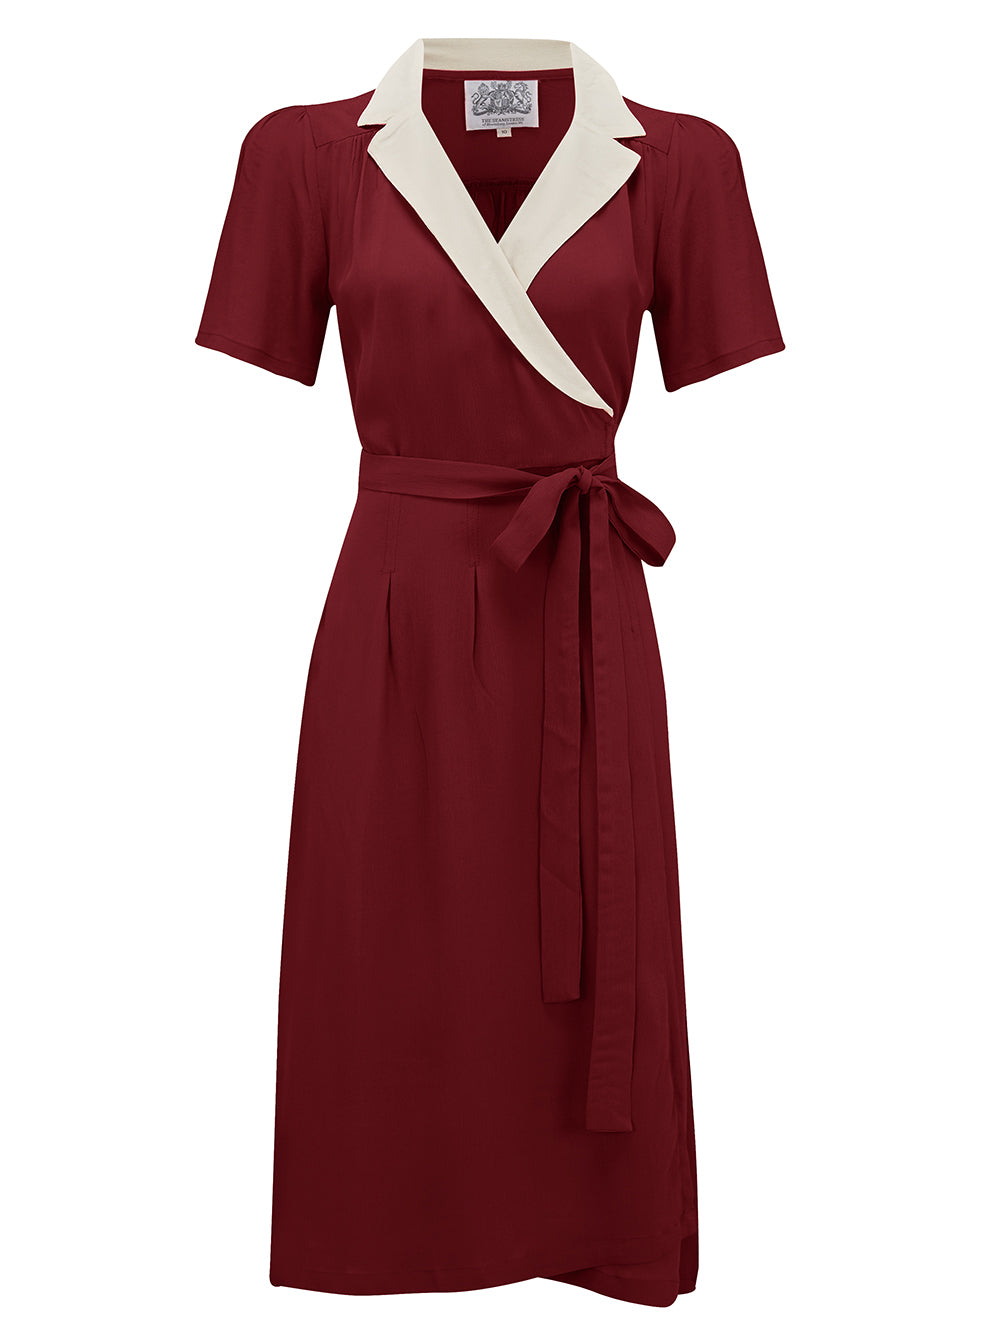 "Peggy" Wrap Dress in Wine with Cream Contrast Collar, Classic 1940s Vintage Style - CC41, Goodwood Revival, Twinwood Festival, Viva Las Vegas Rockabilly Weekend Rock n Romance The Seamstress of Bloomsbury